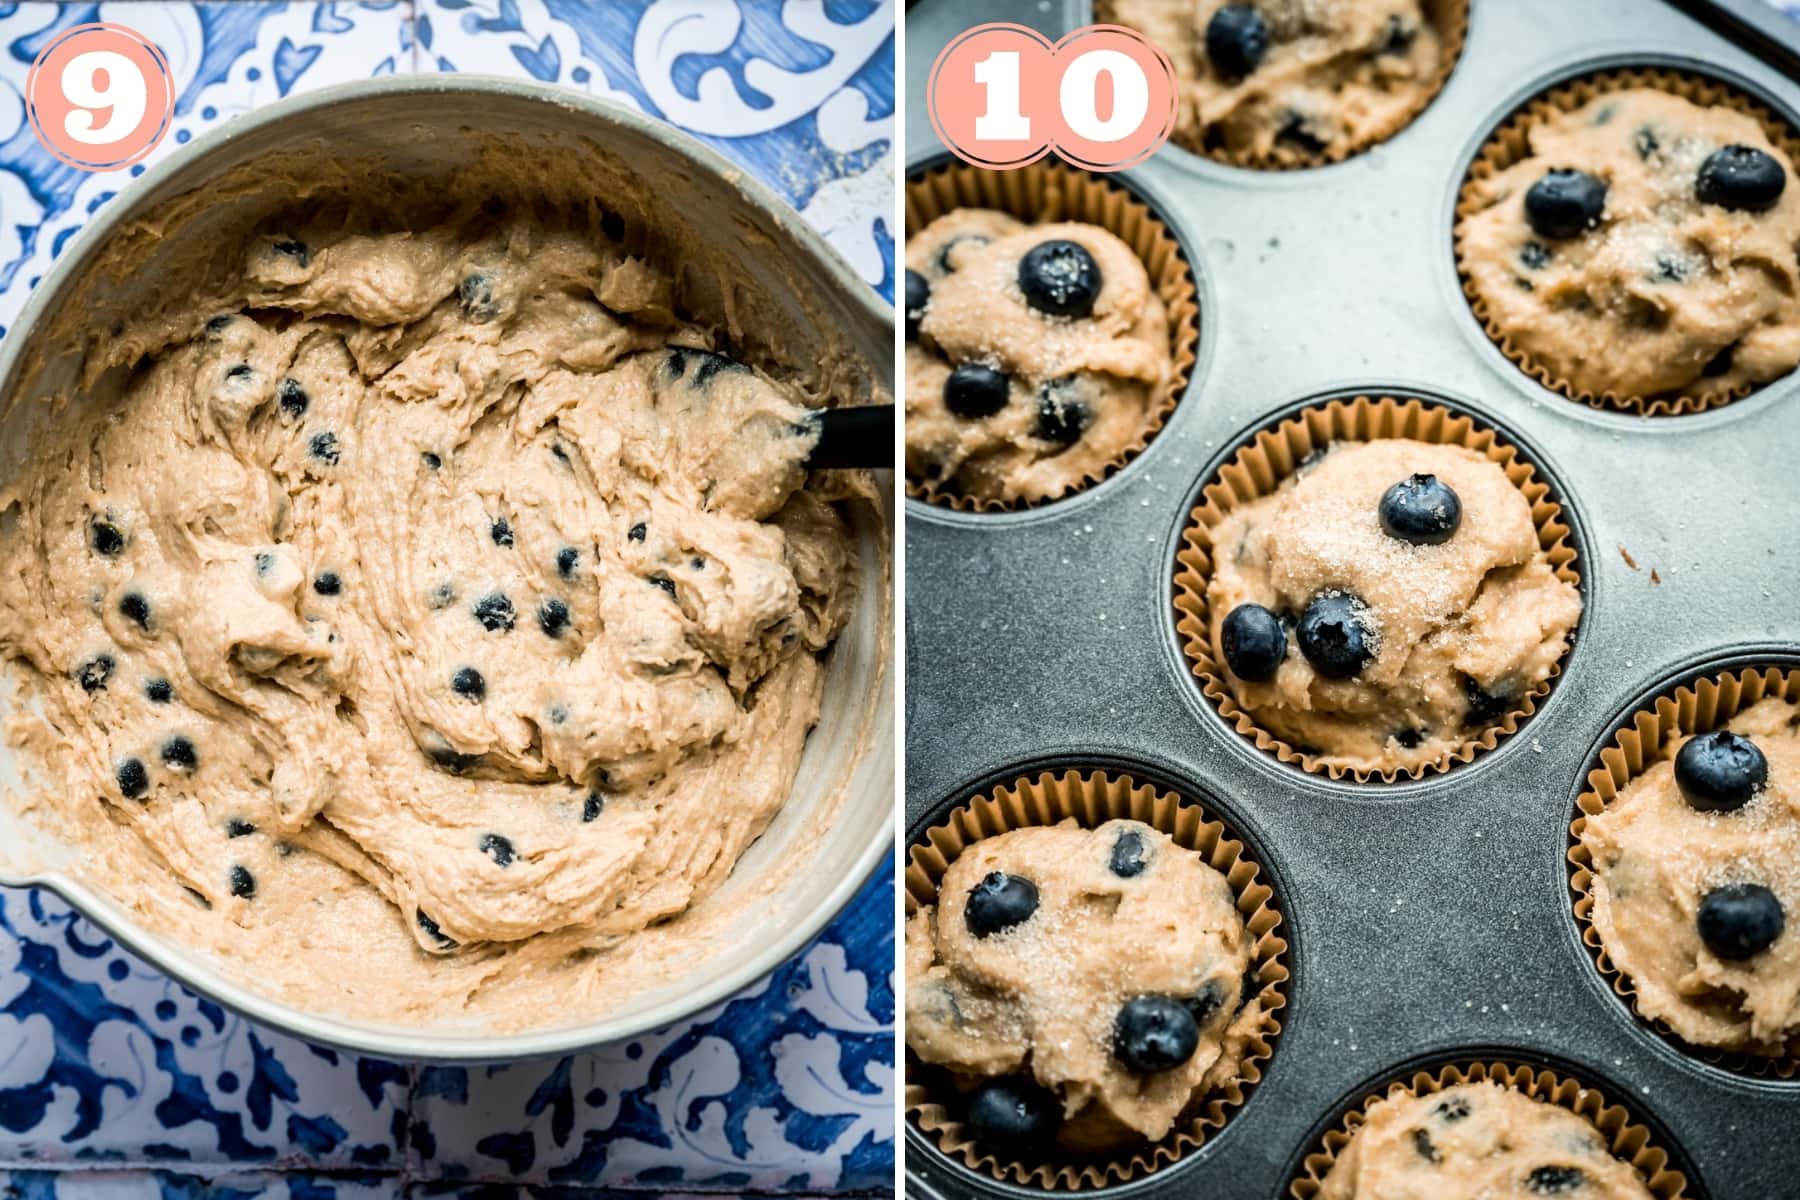 on the left: vegan blueberry muffin batter in mixing bowl. On the right: unbaked muffins in muffin tins. 